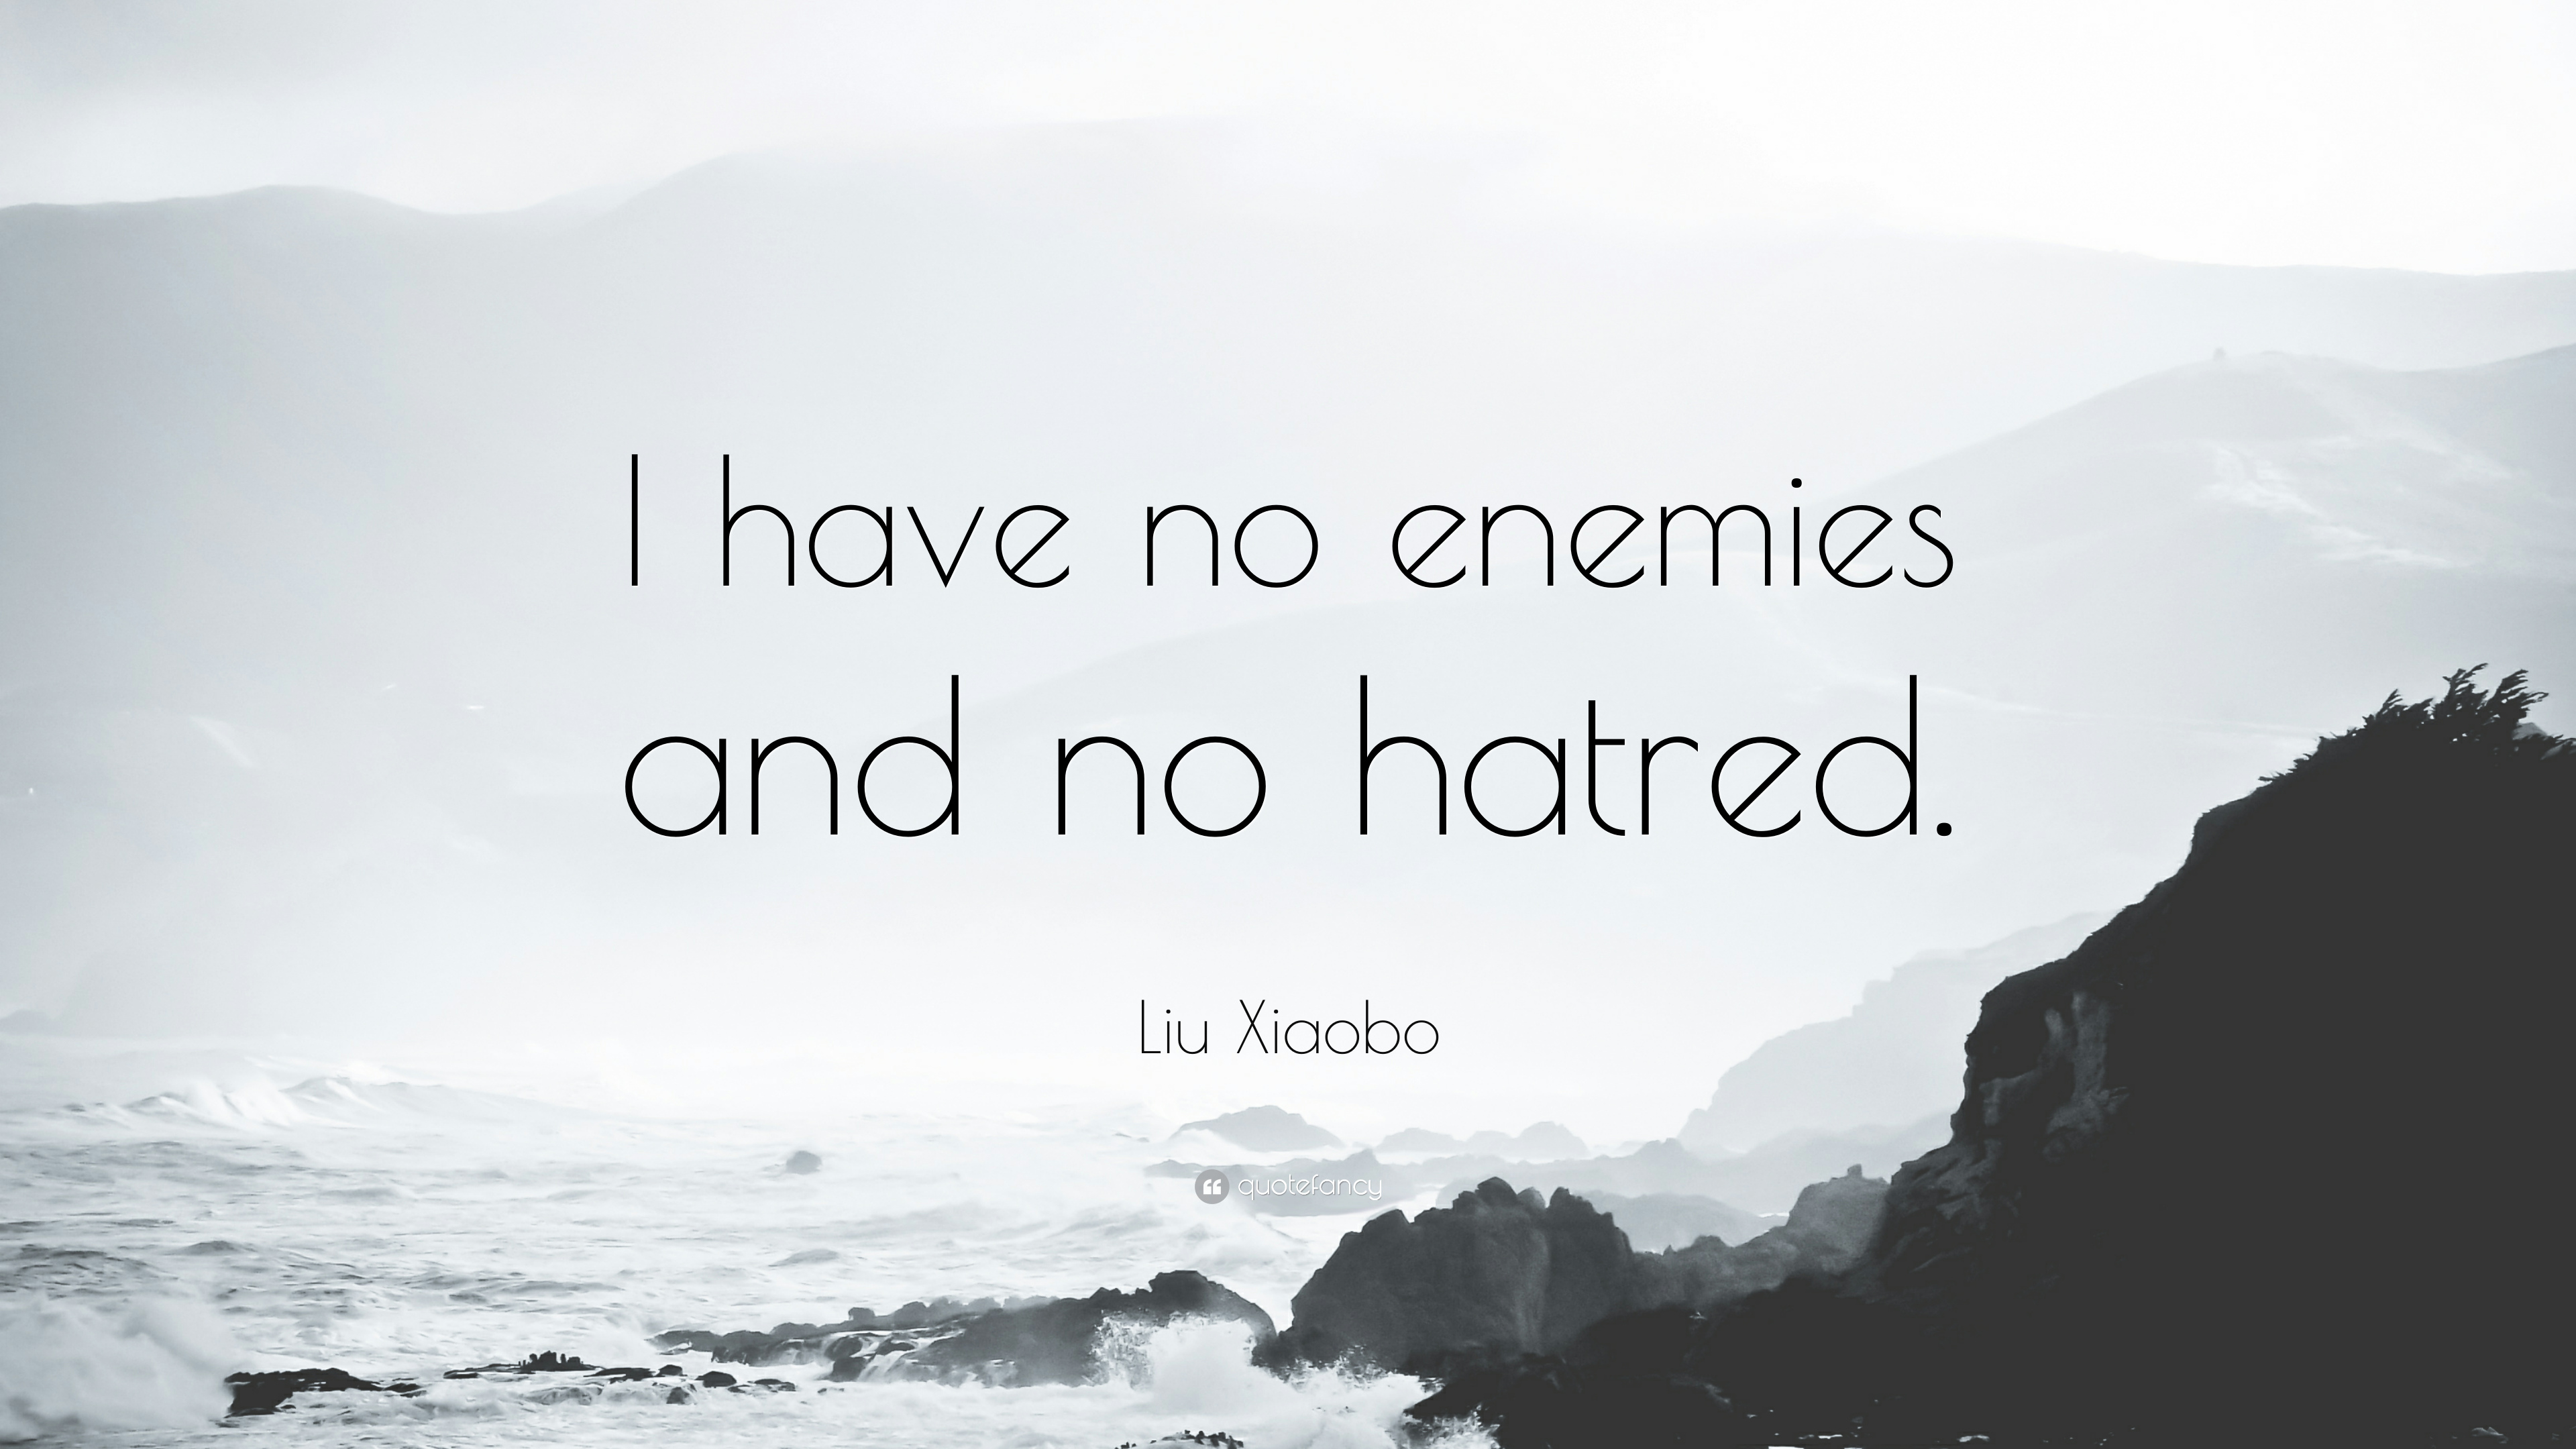 Liu Xiaobo Quote: “I have no enemies and no hatred.”